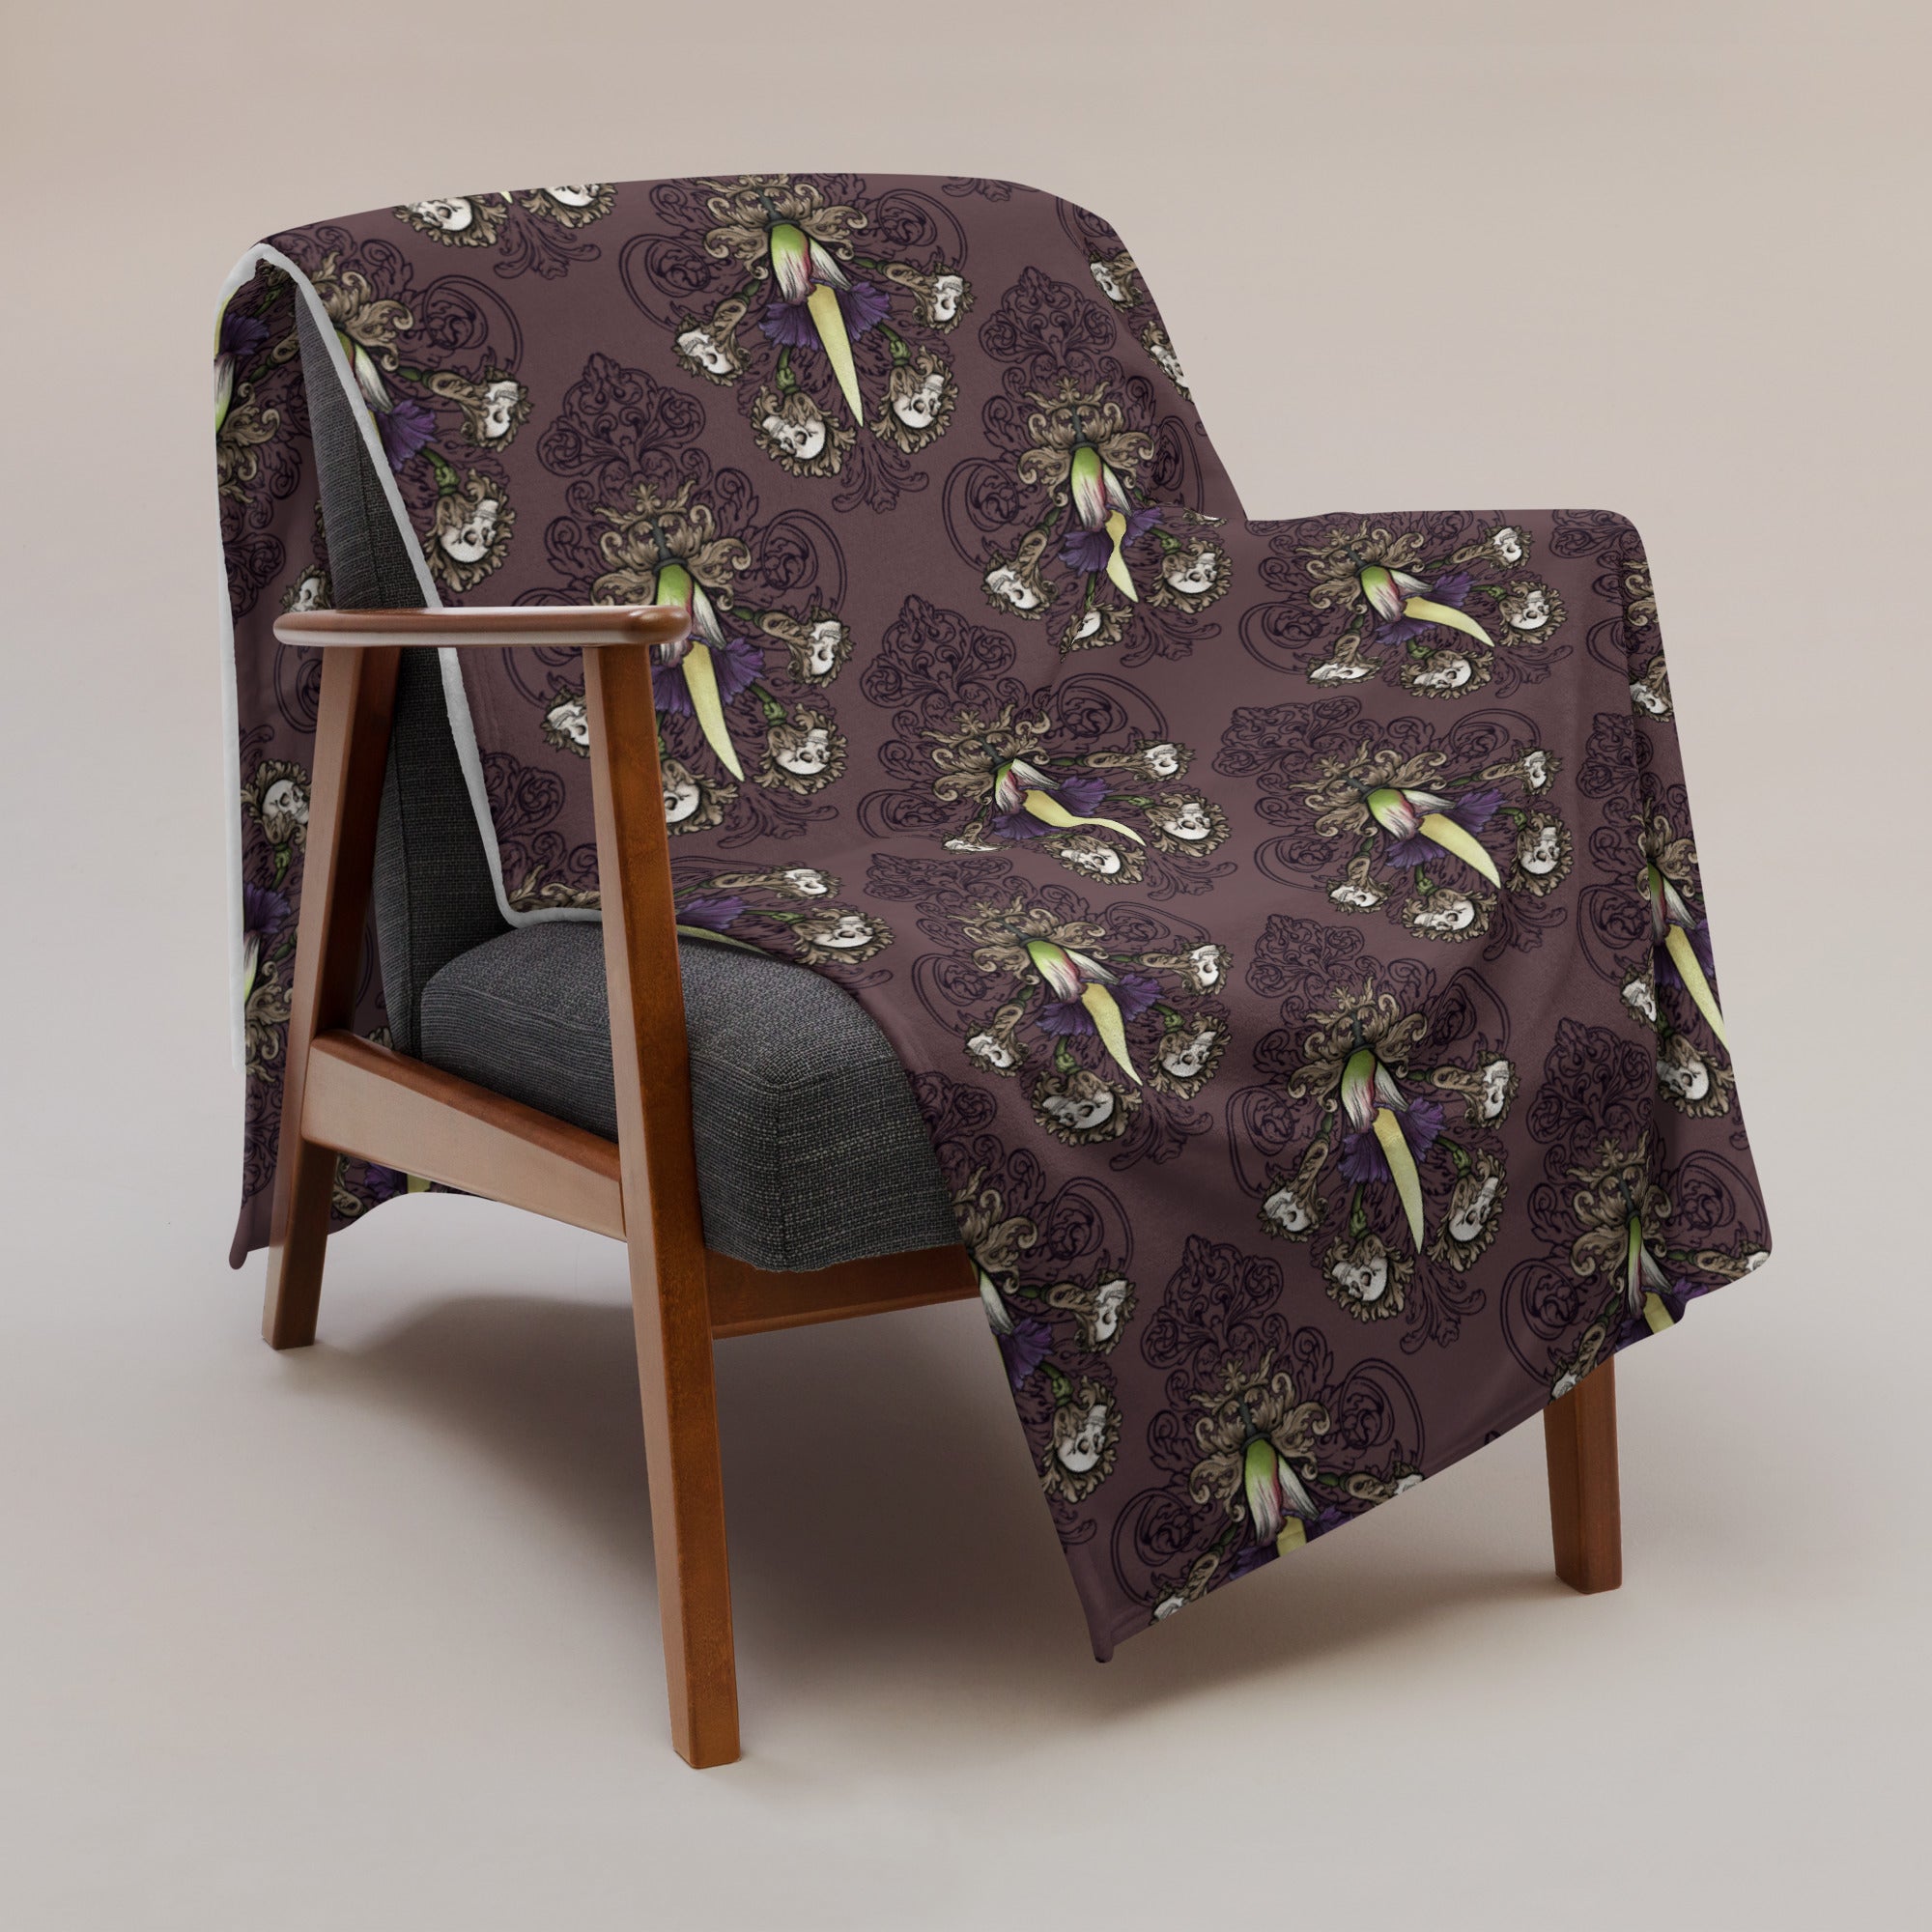 image of 60" x 80" Corpse flower blanket draped over a chair with repeated pattern of a corpse flower with skulls on filigree and dark, smokey, deep purple background